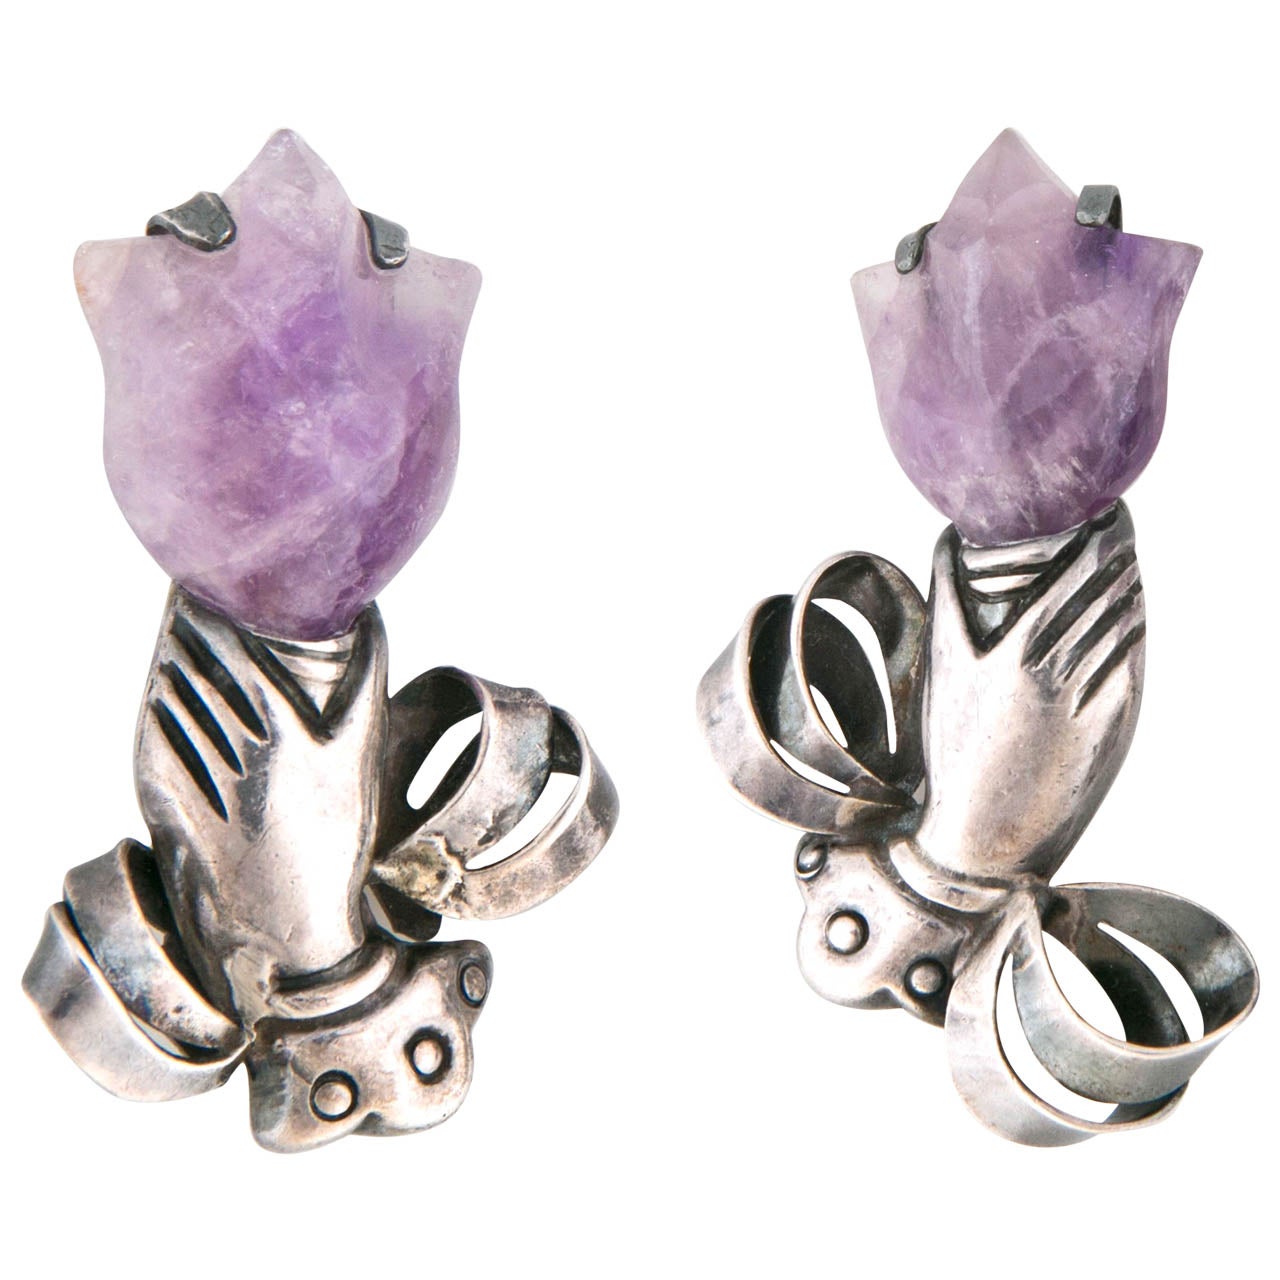 William Spratling's Unmatched Pair of Amethyst Sterling Silver Pins For Sale